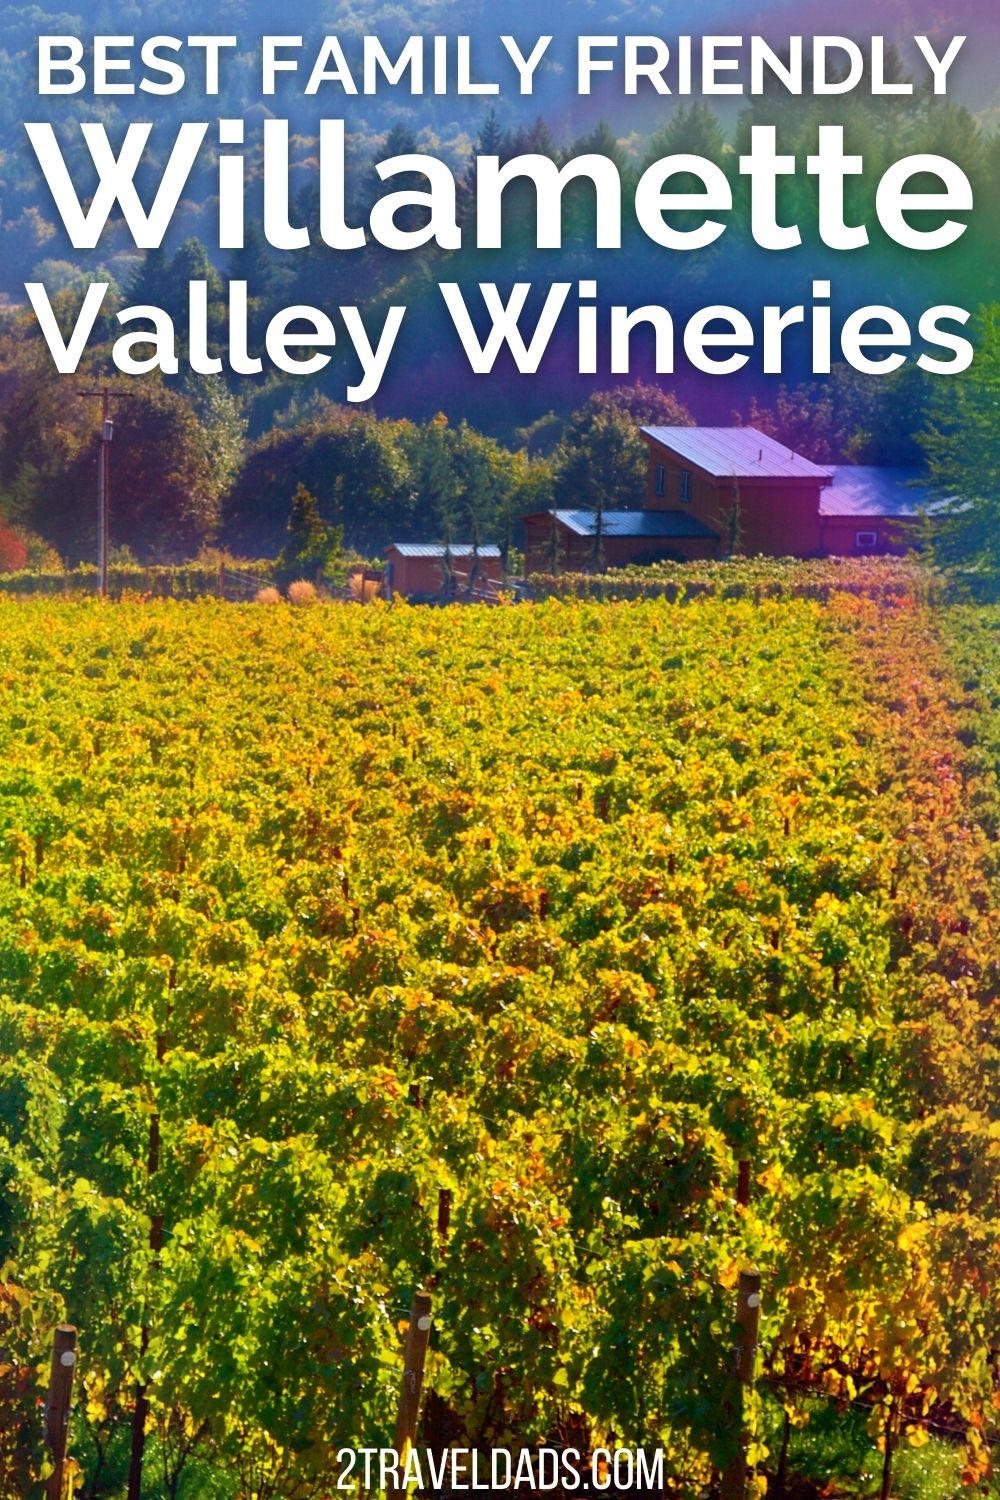 Best family friendly Willamette Valley wineries near Portland are easy to get to. Map of wineries and top picks for wine tasting when you're with kids in Oregon's premier wine region.